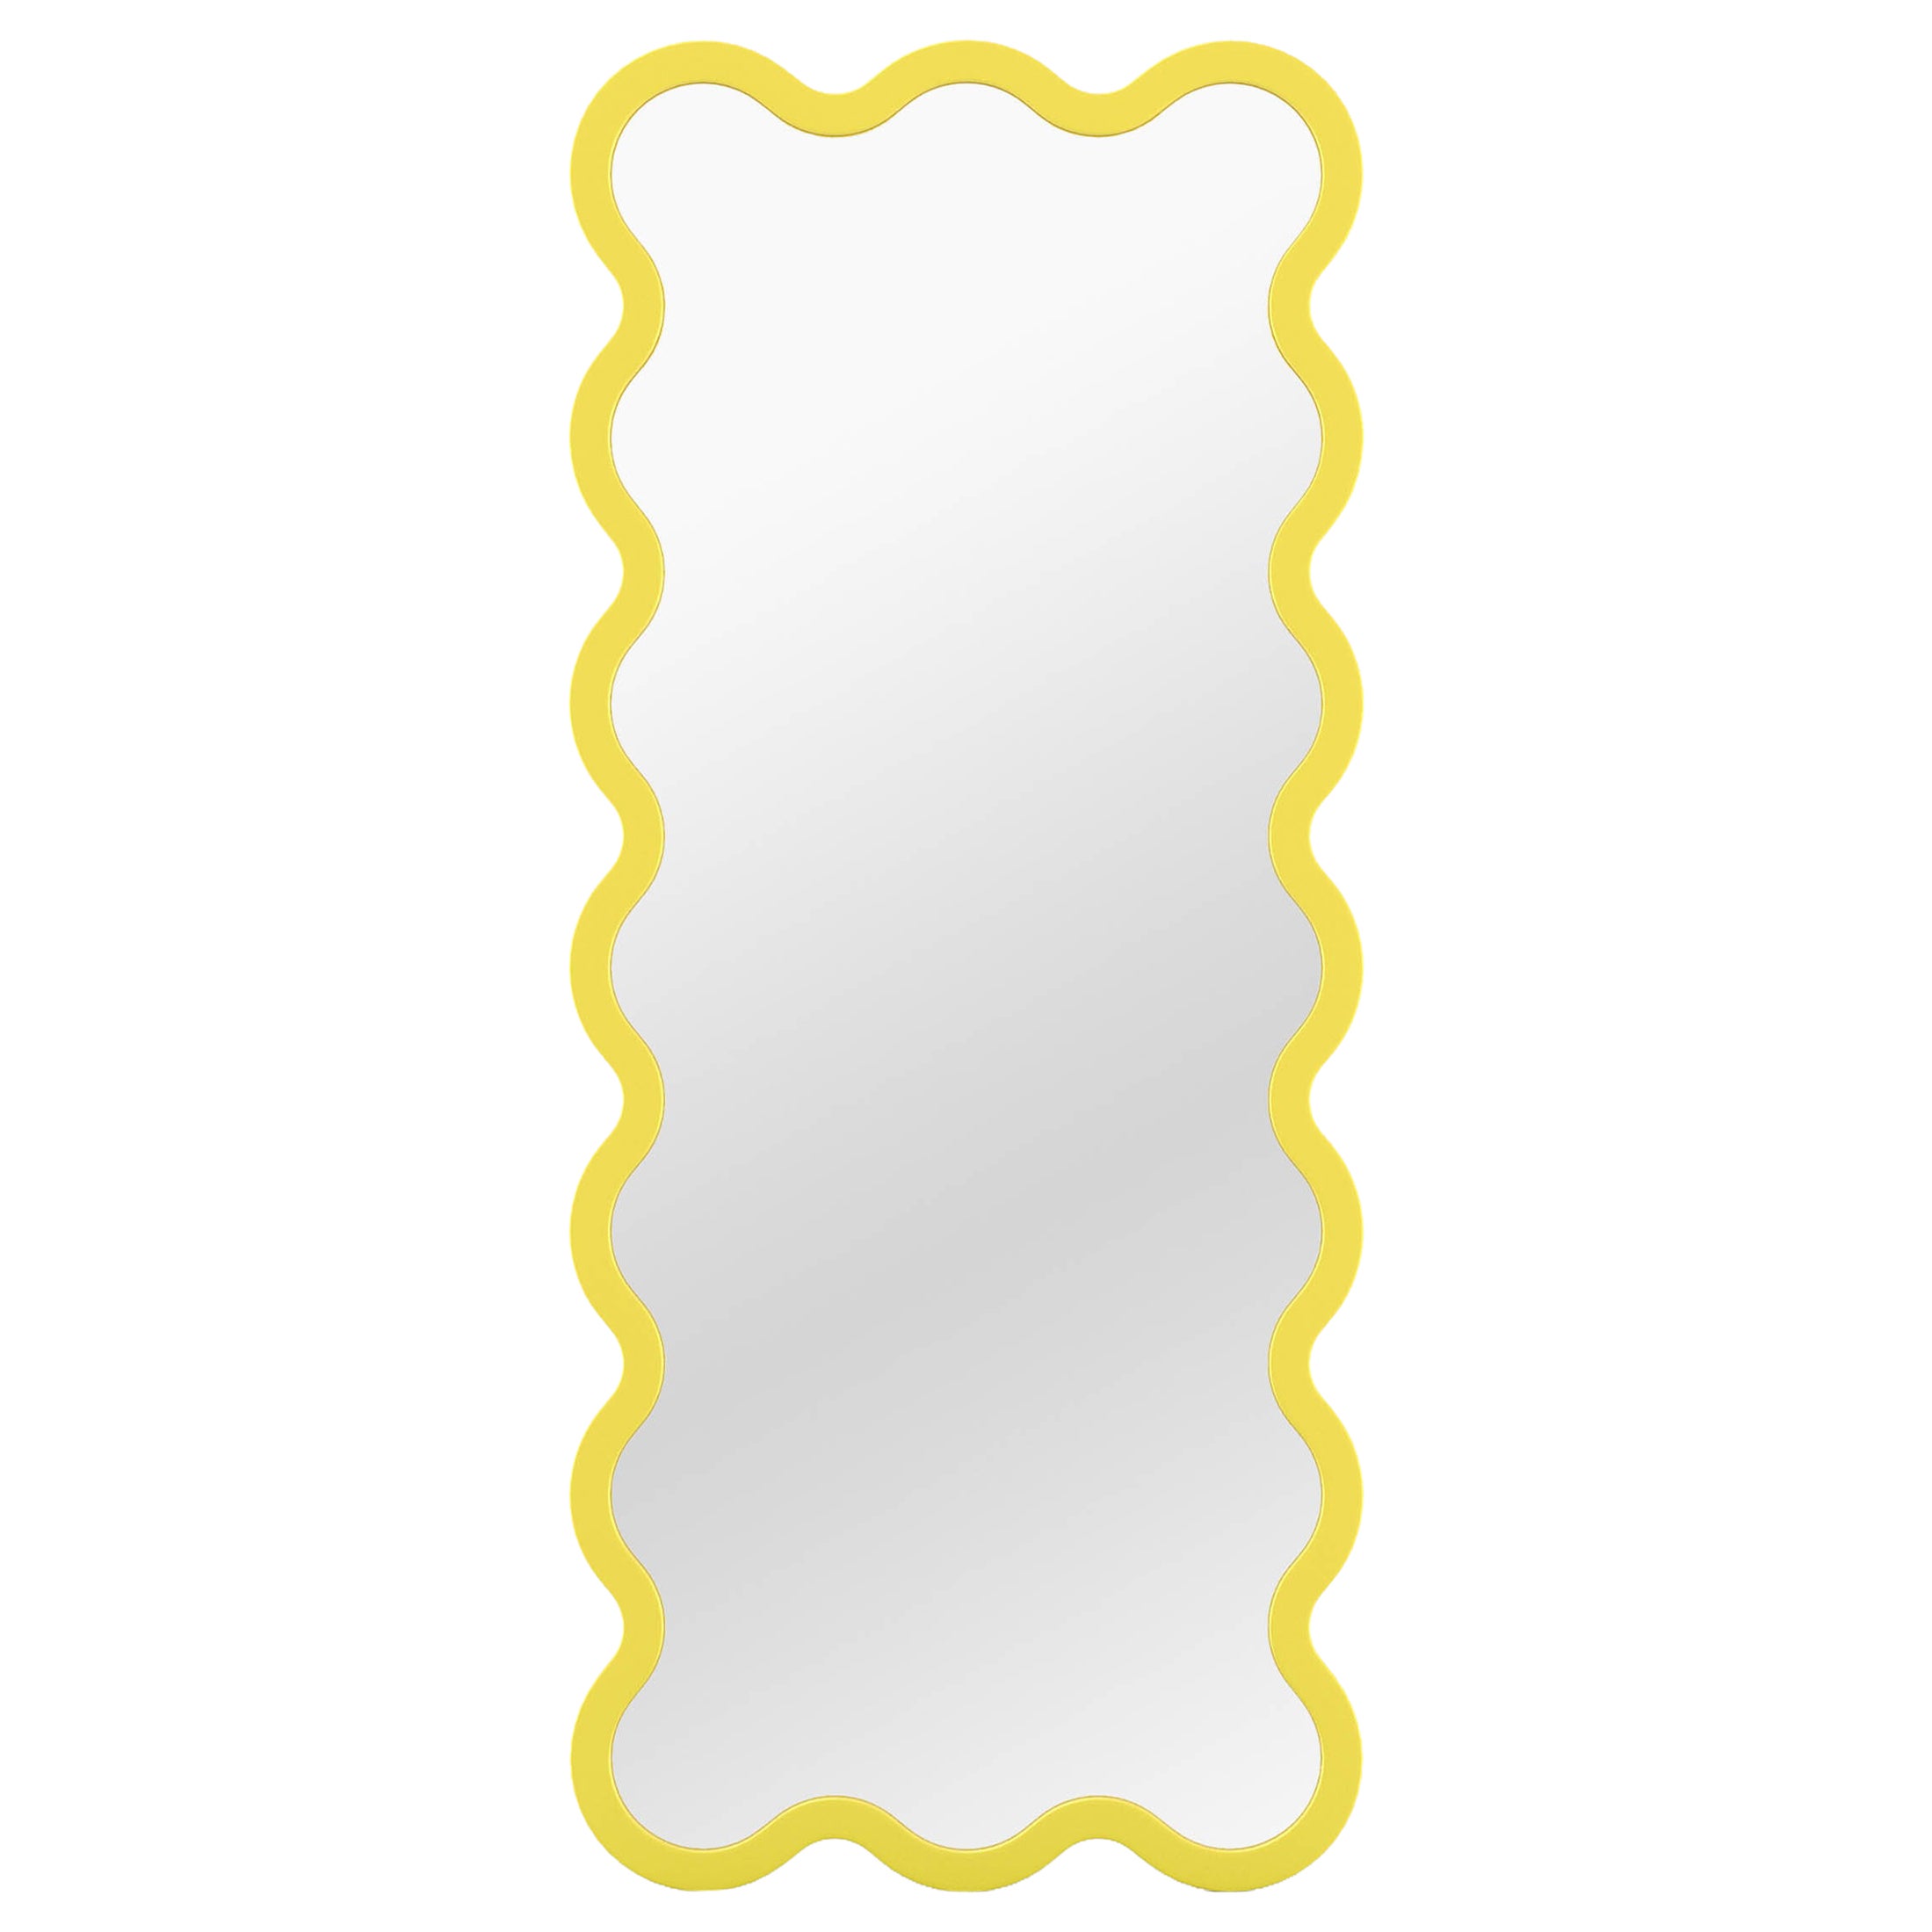 Contemporary Mirror 'Hvyli 16' by Oitoproducts, Yellow Frame For Sale